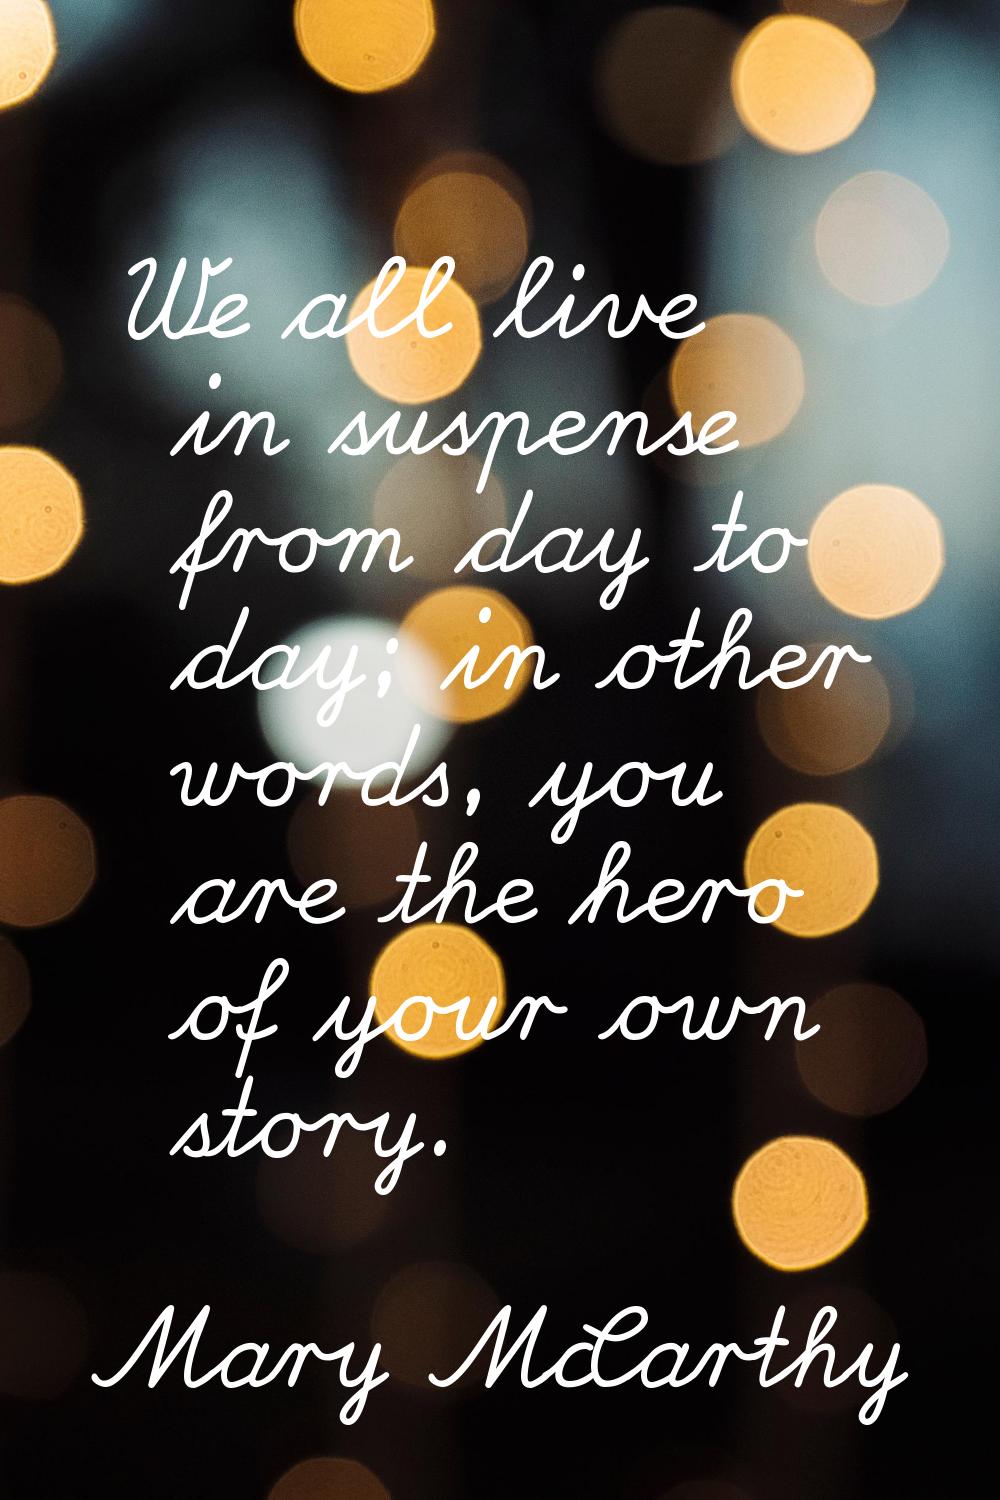 We all live in suspense from day to day; in other words, you are the hero of your own story.